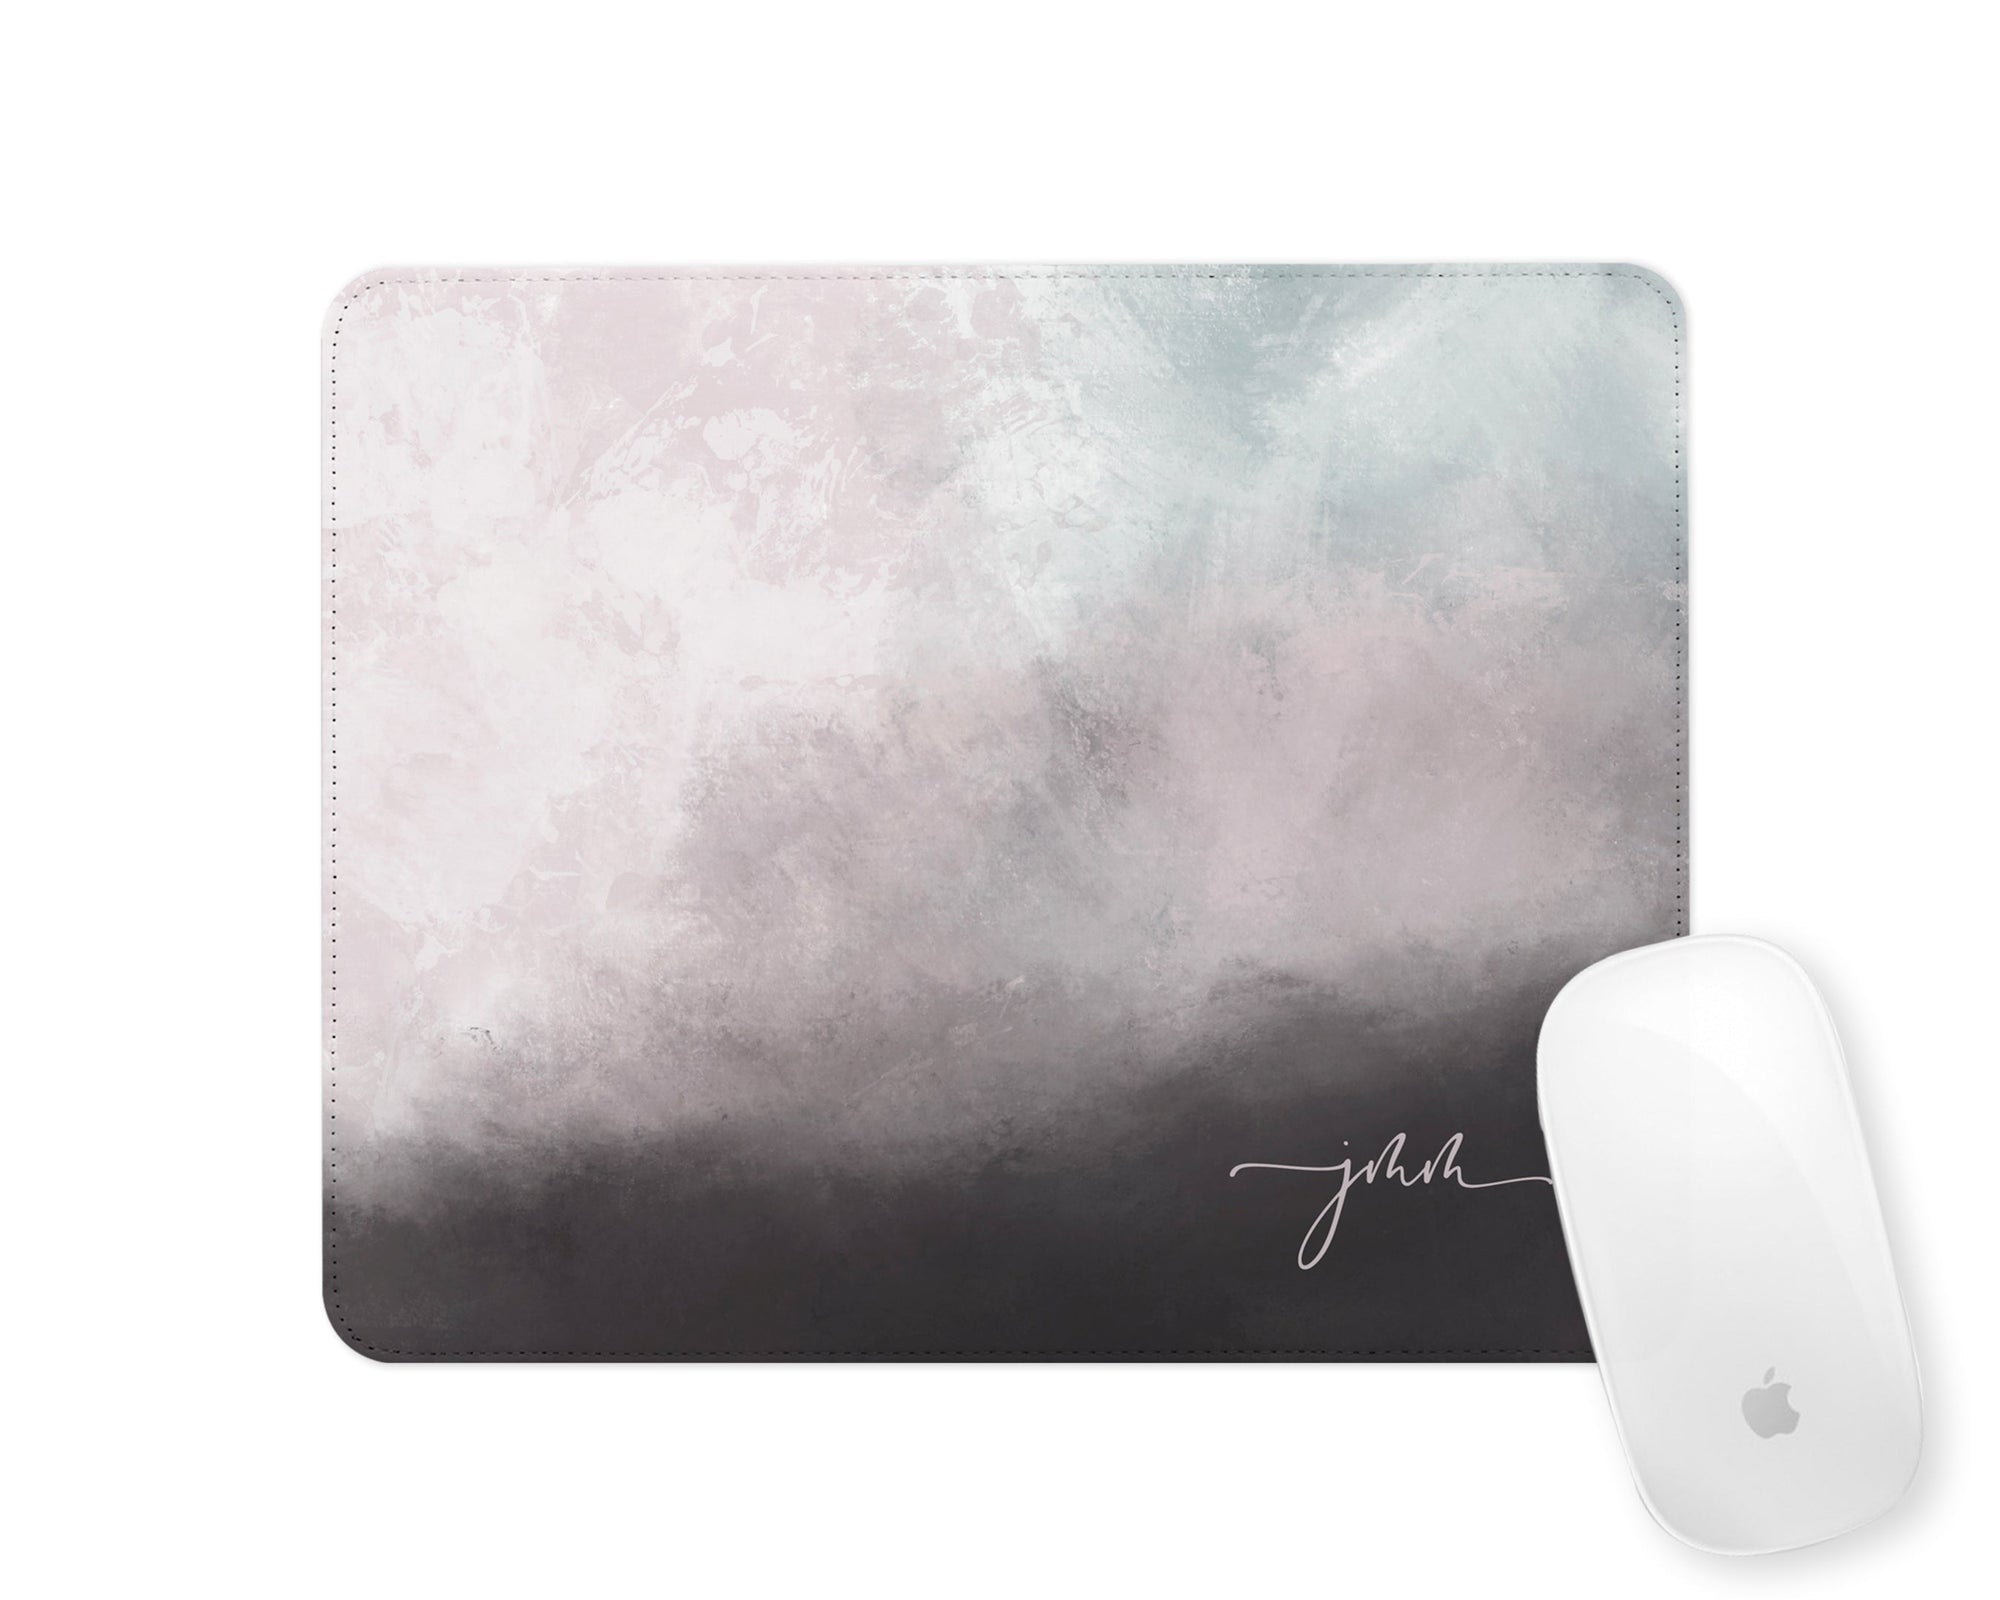 Personalised Mouse Mat | Stormclouds Abstract | Script Initials | Aqua